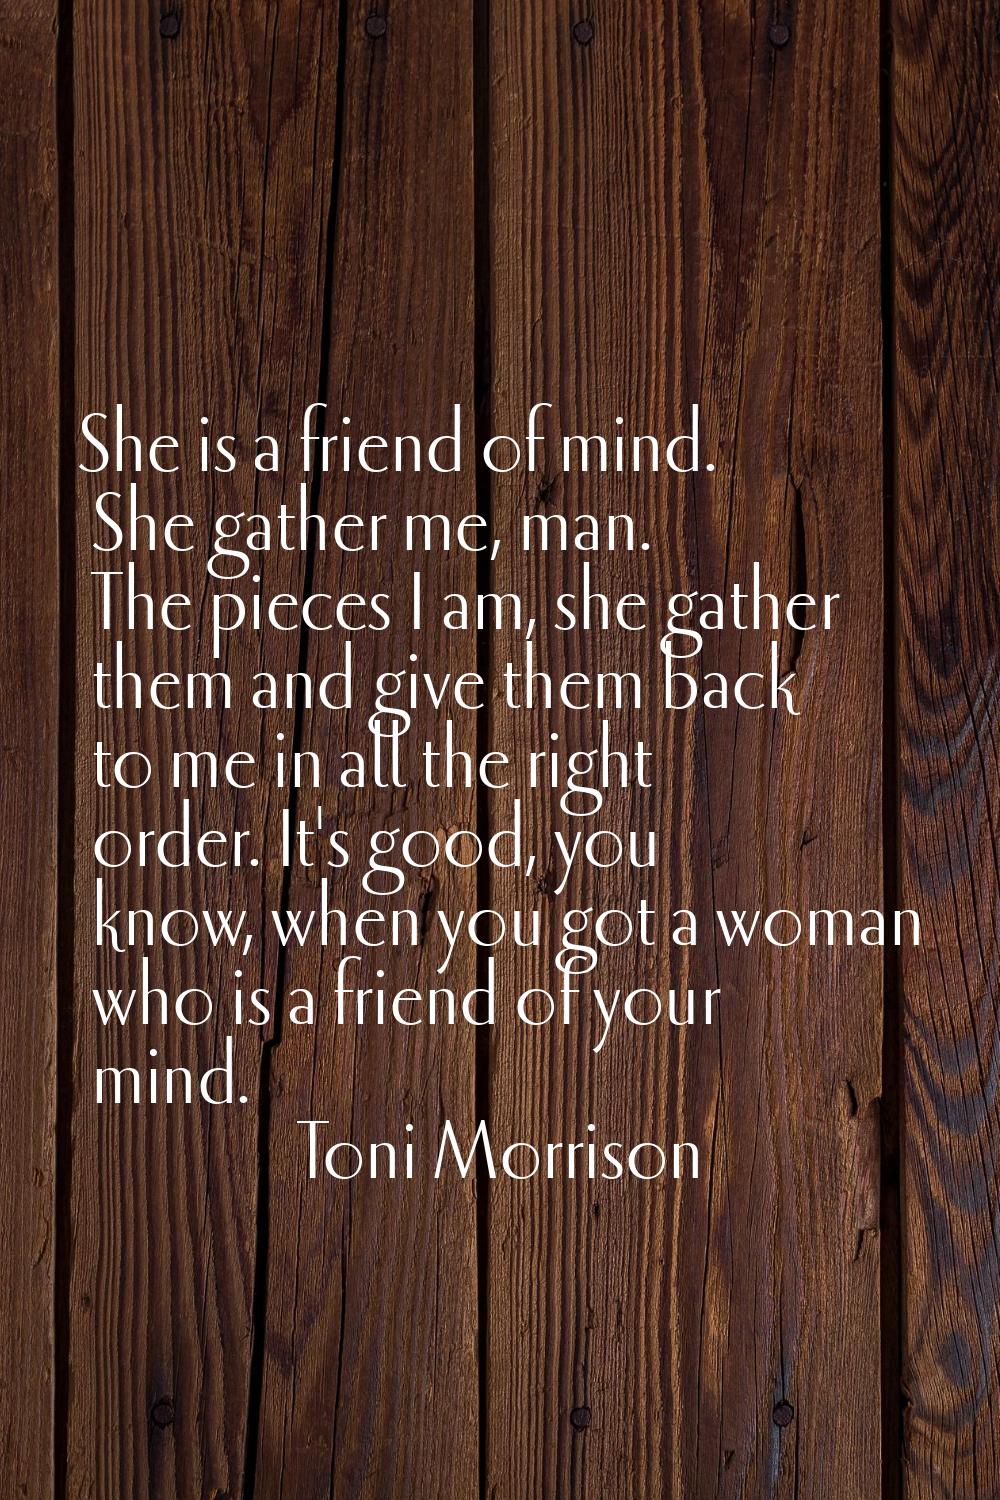 She is a friend of mind. She gather me, man. The pieces I am, she gather them and give them back to